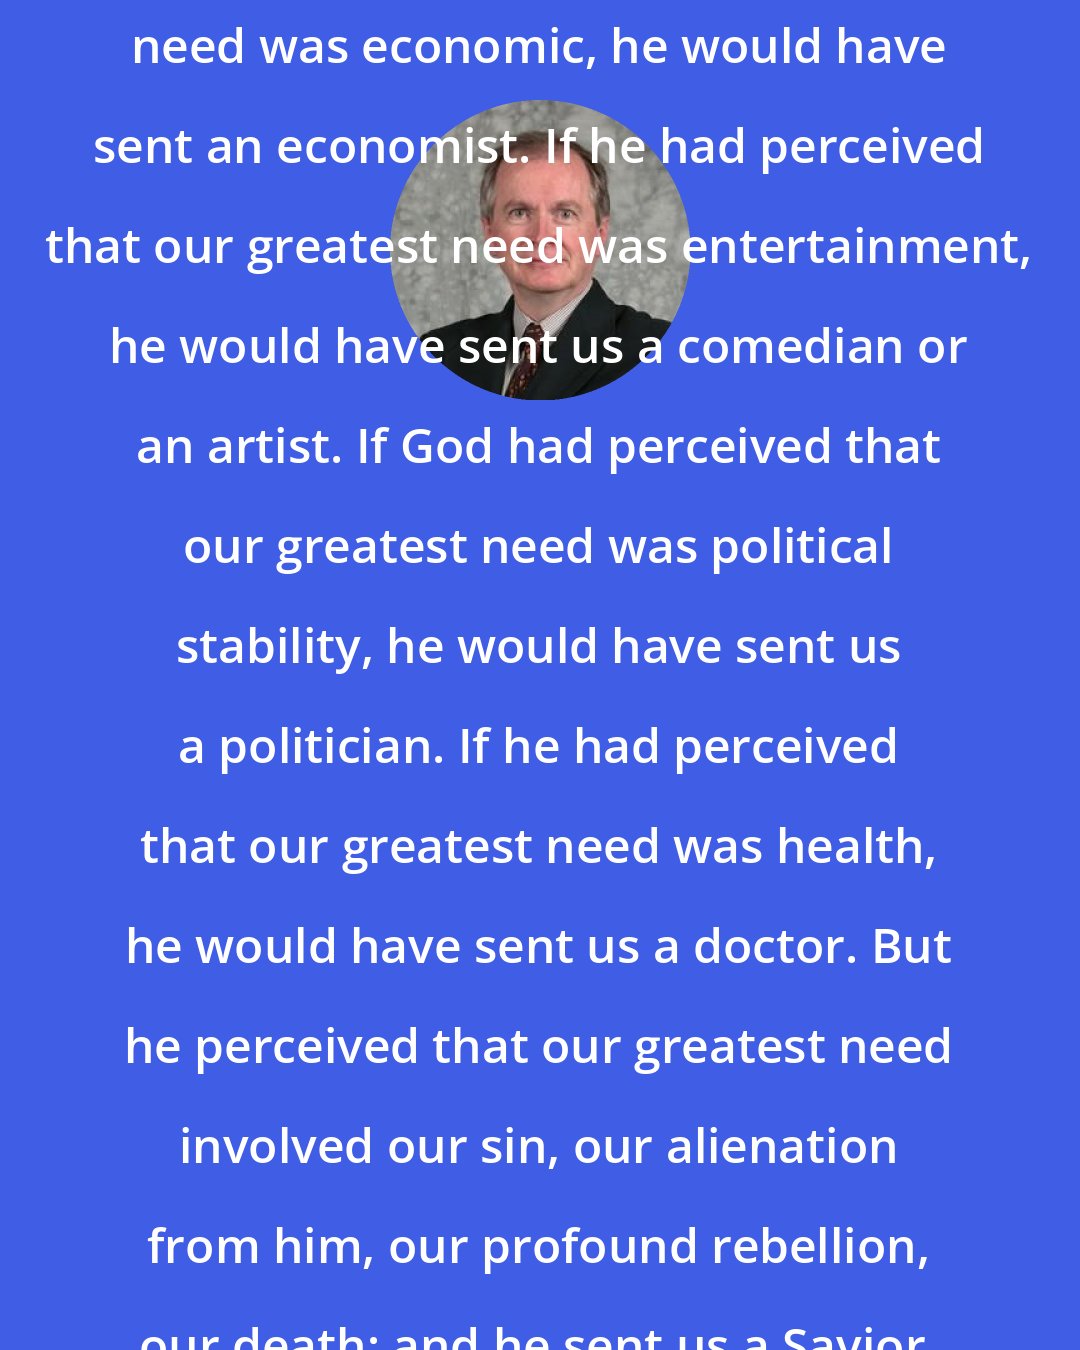 D. A. Carson: If God had perceived that our greatest need was economic, he would have sent an economist. If he had perceived that our greatest need was entertainment, he would have sent us a comedian or an artist. If God had perceived that our greatest need was political stability, he would have sent us a politician. If he had perceived that our greatest need was health, he would have sent us a doctor. But he perceived that our greatest need involved our sin, our alienation from him, our profound rebellion, our death; and he sent us a Savior.